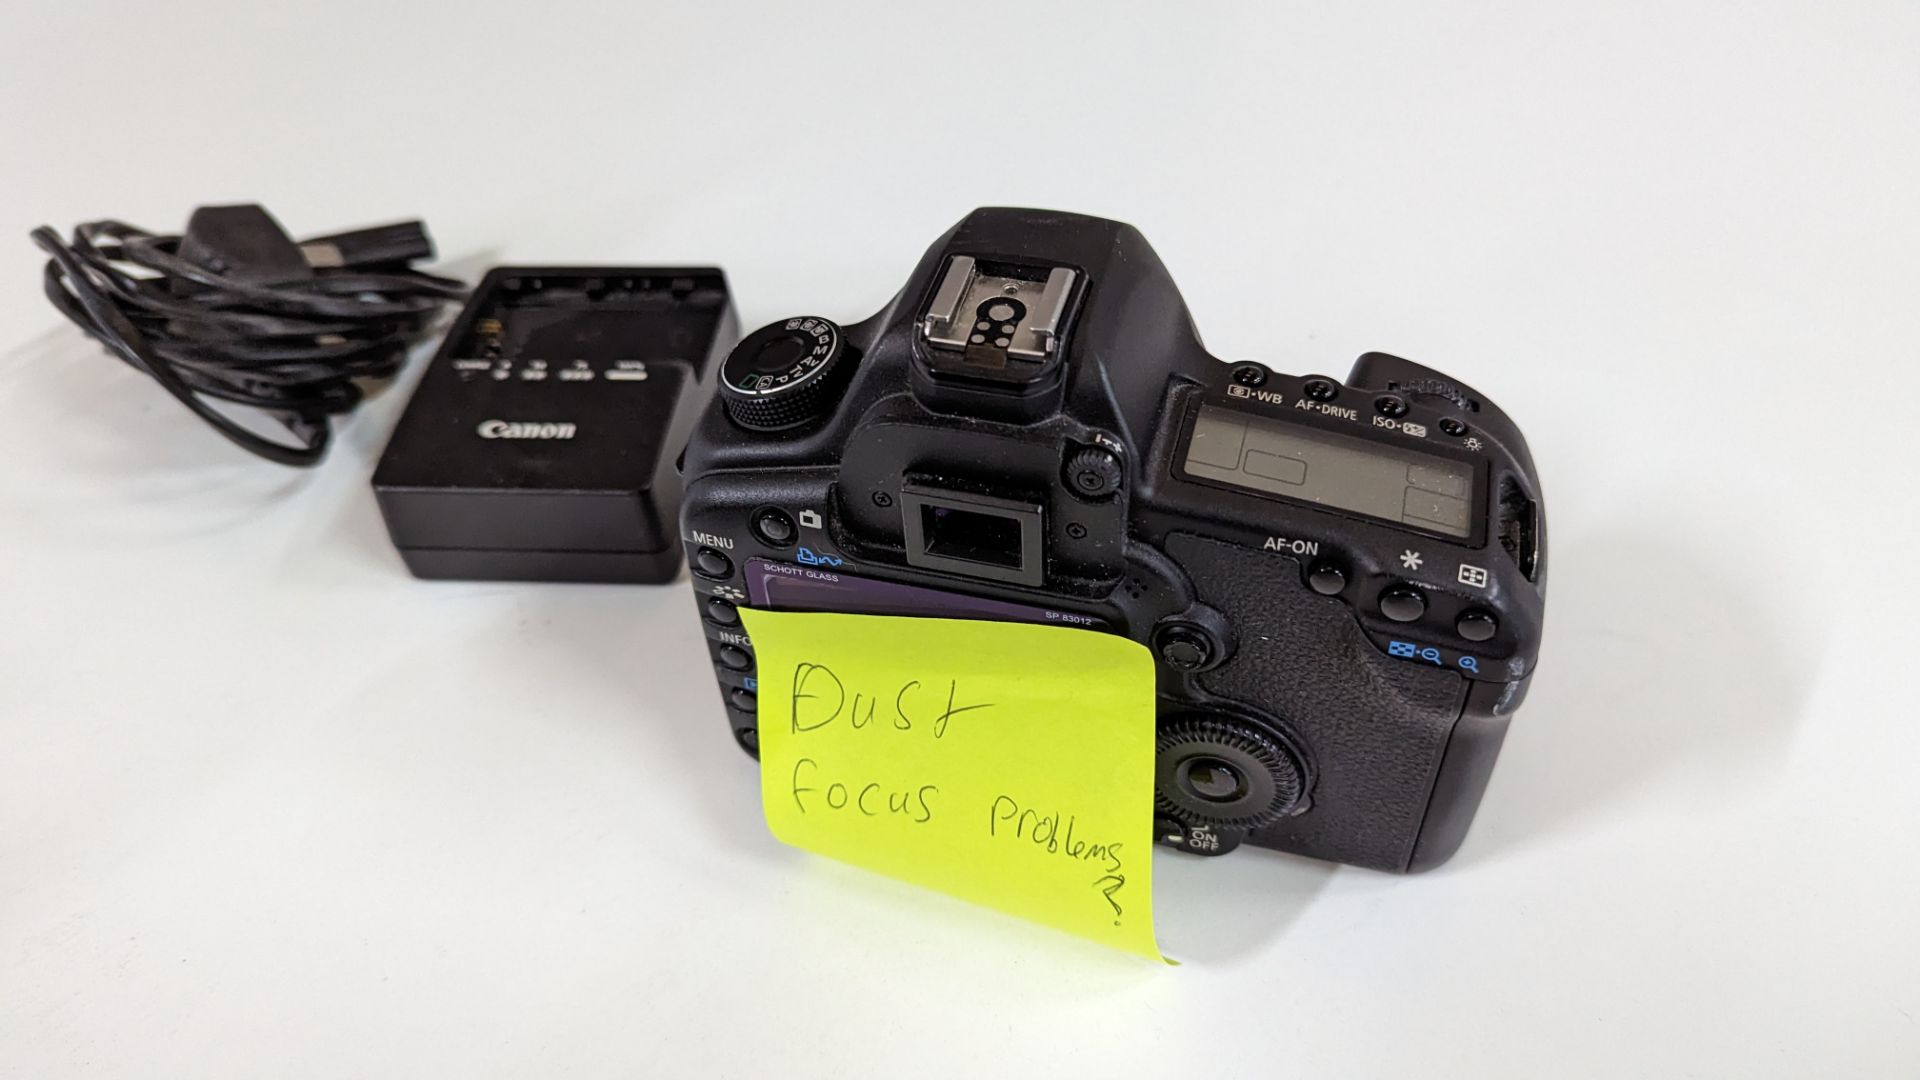 Canon EOS 5D Mark II digital camera plus Canon battery charger. N.B. no lens or battery included wi - Image 11 of 11